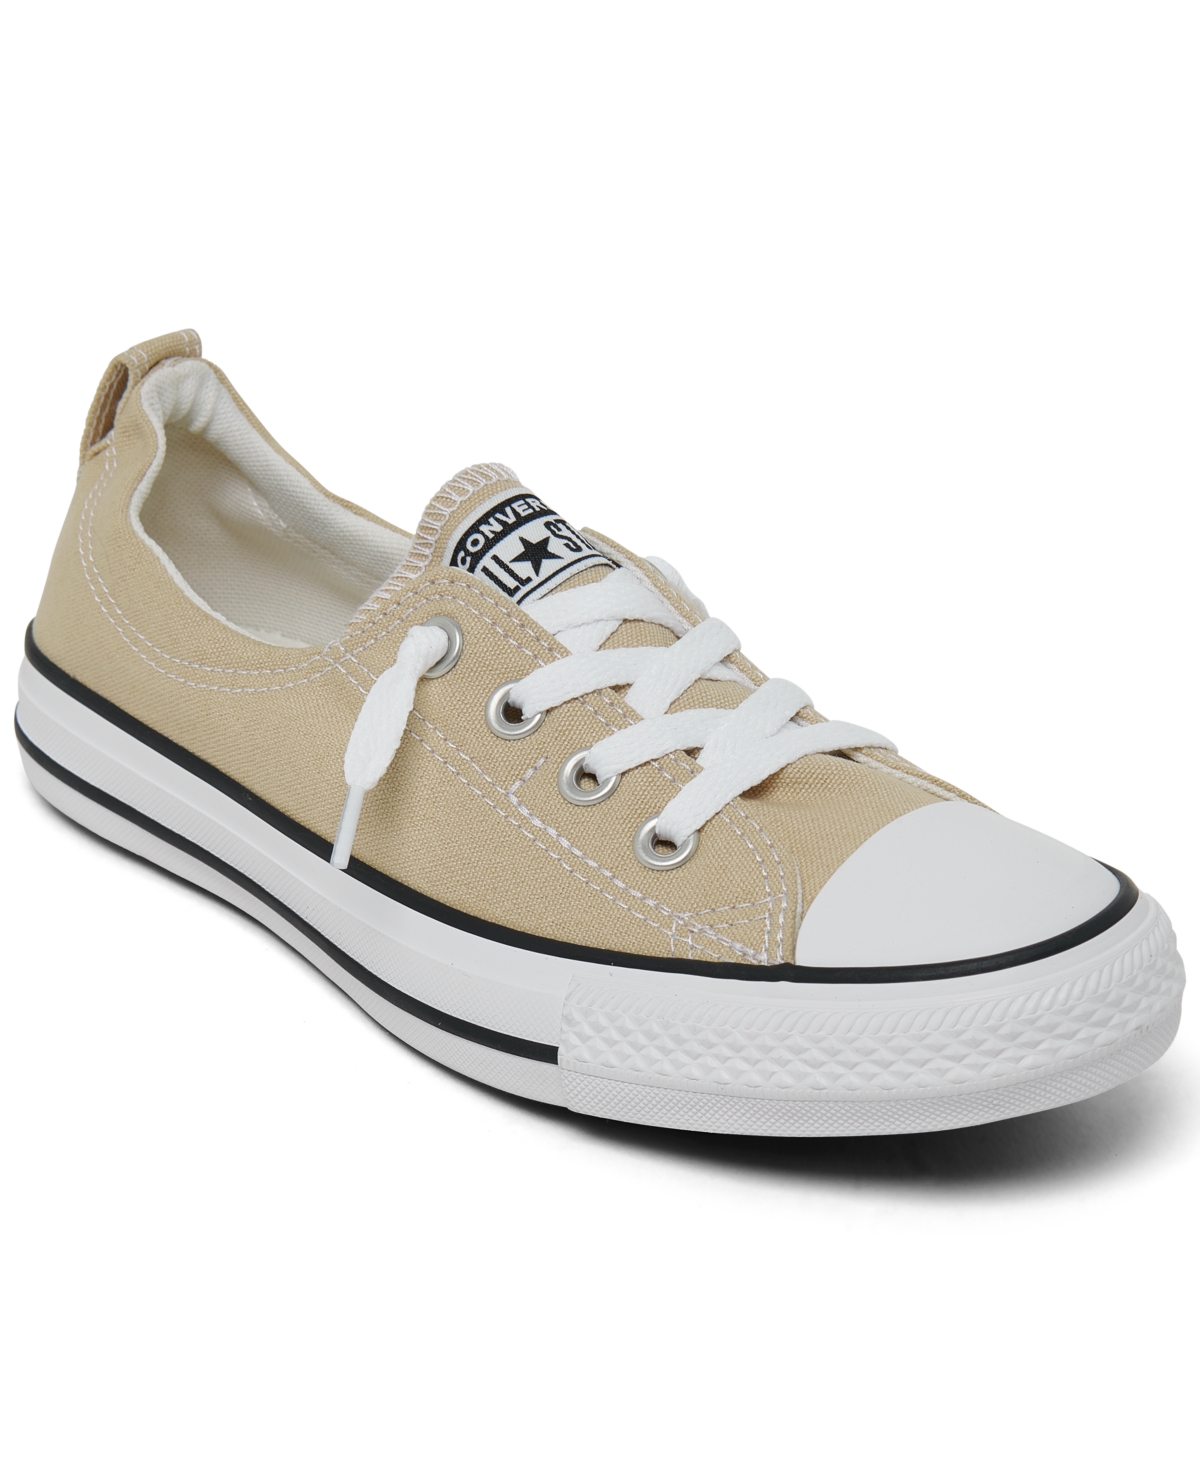 Shop Converse Women's Chuck Taylor All Star Shoreline Low Casual Sneakers From Finish Line In Nutty Granola,white,black